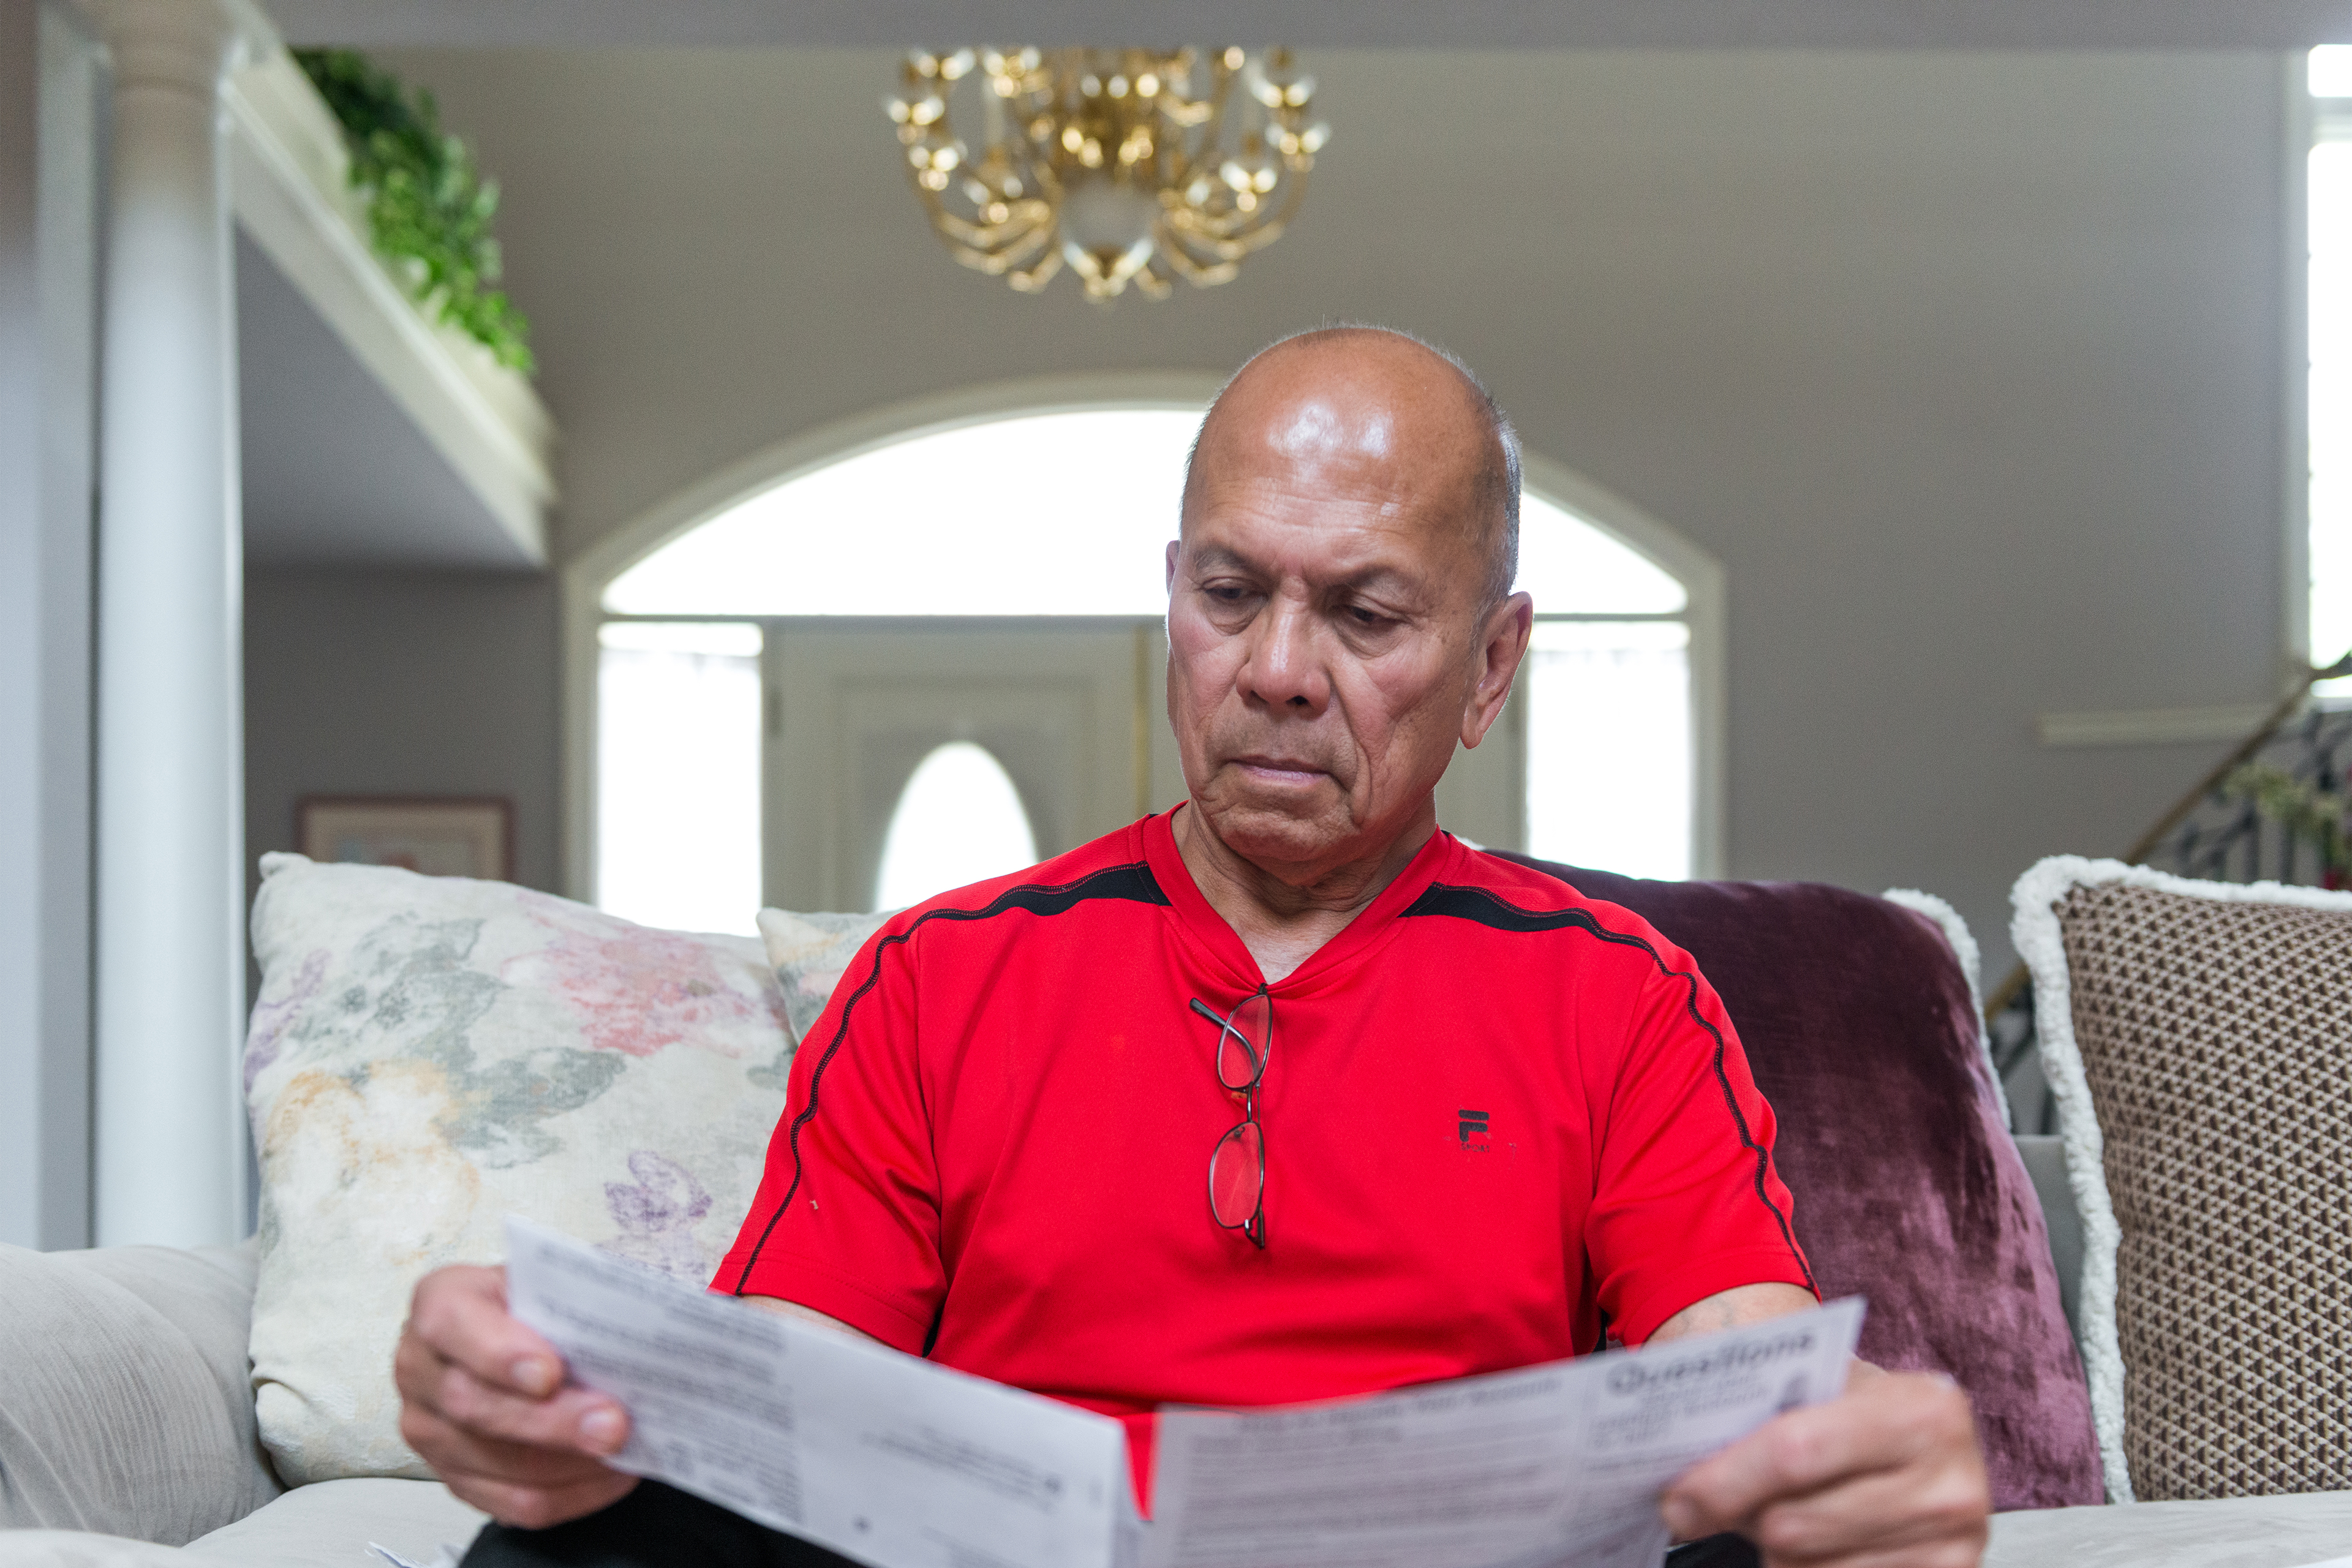 A photo shows Danilo Manimtim sitting on a couch at home looking at medical bills.